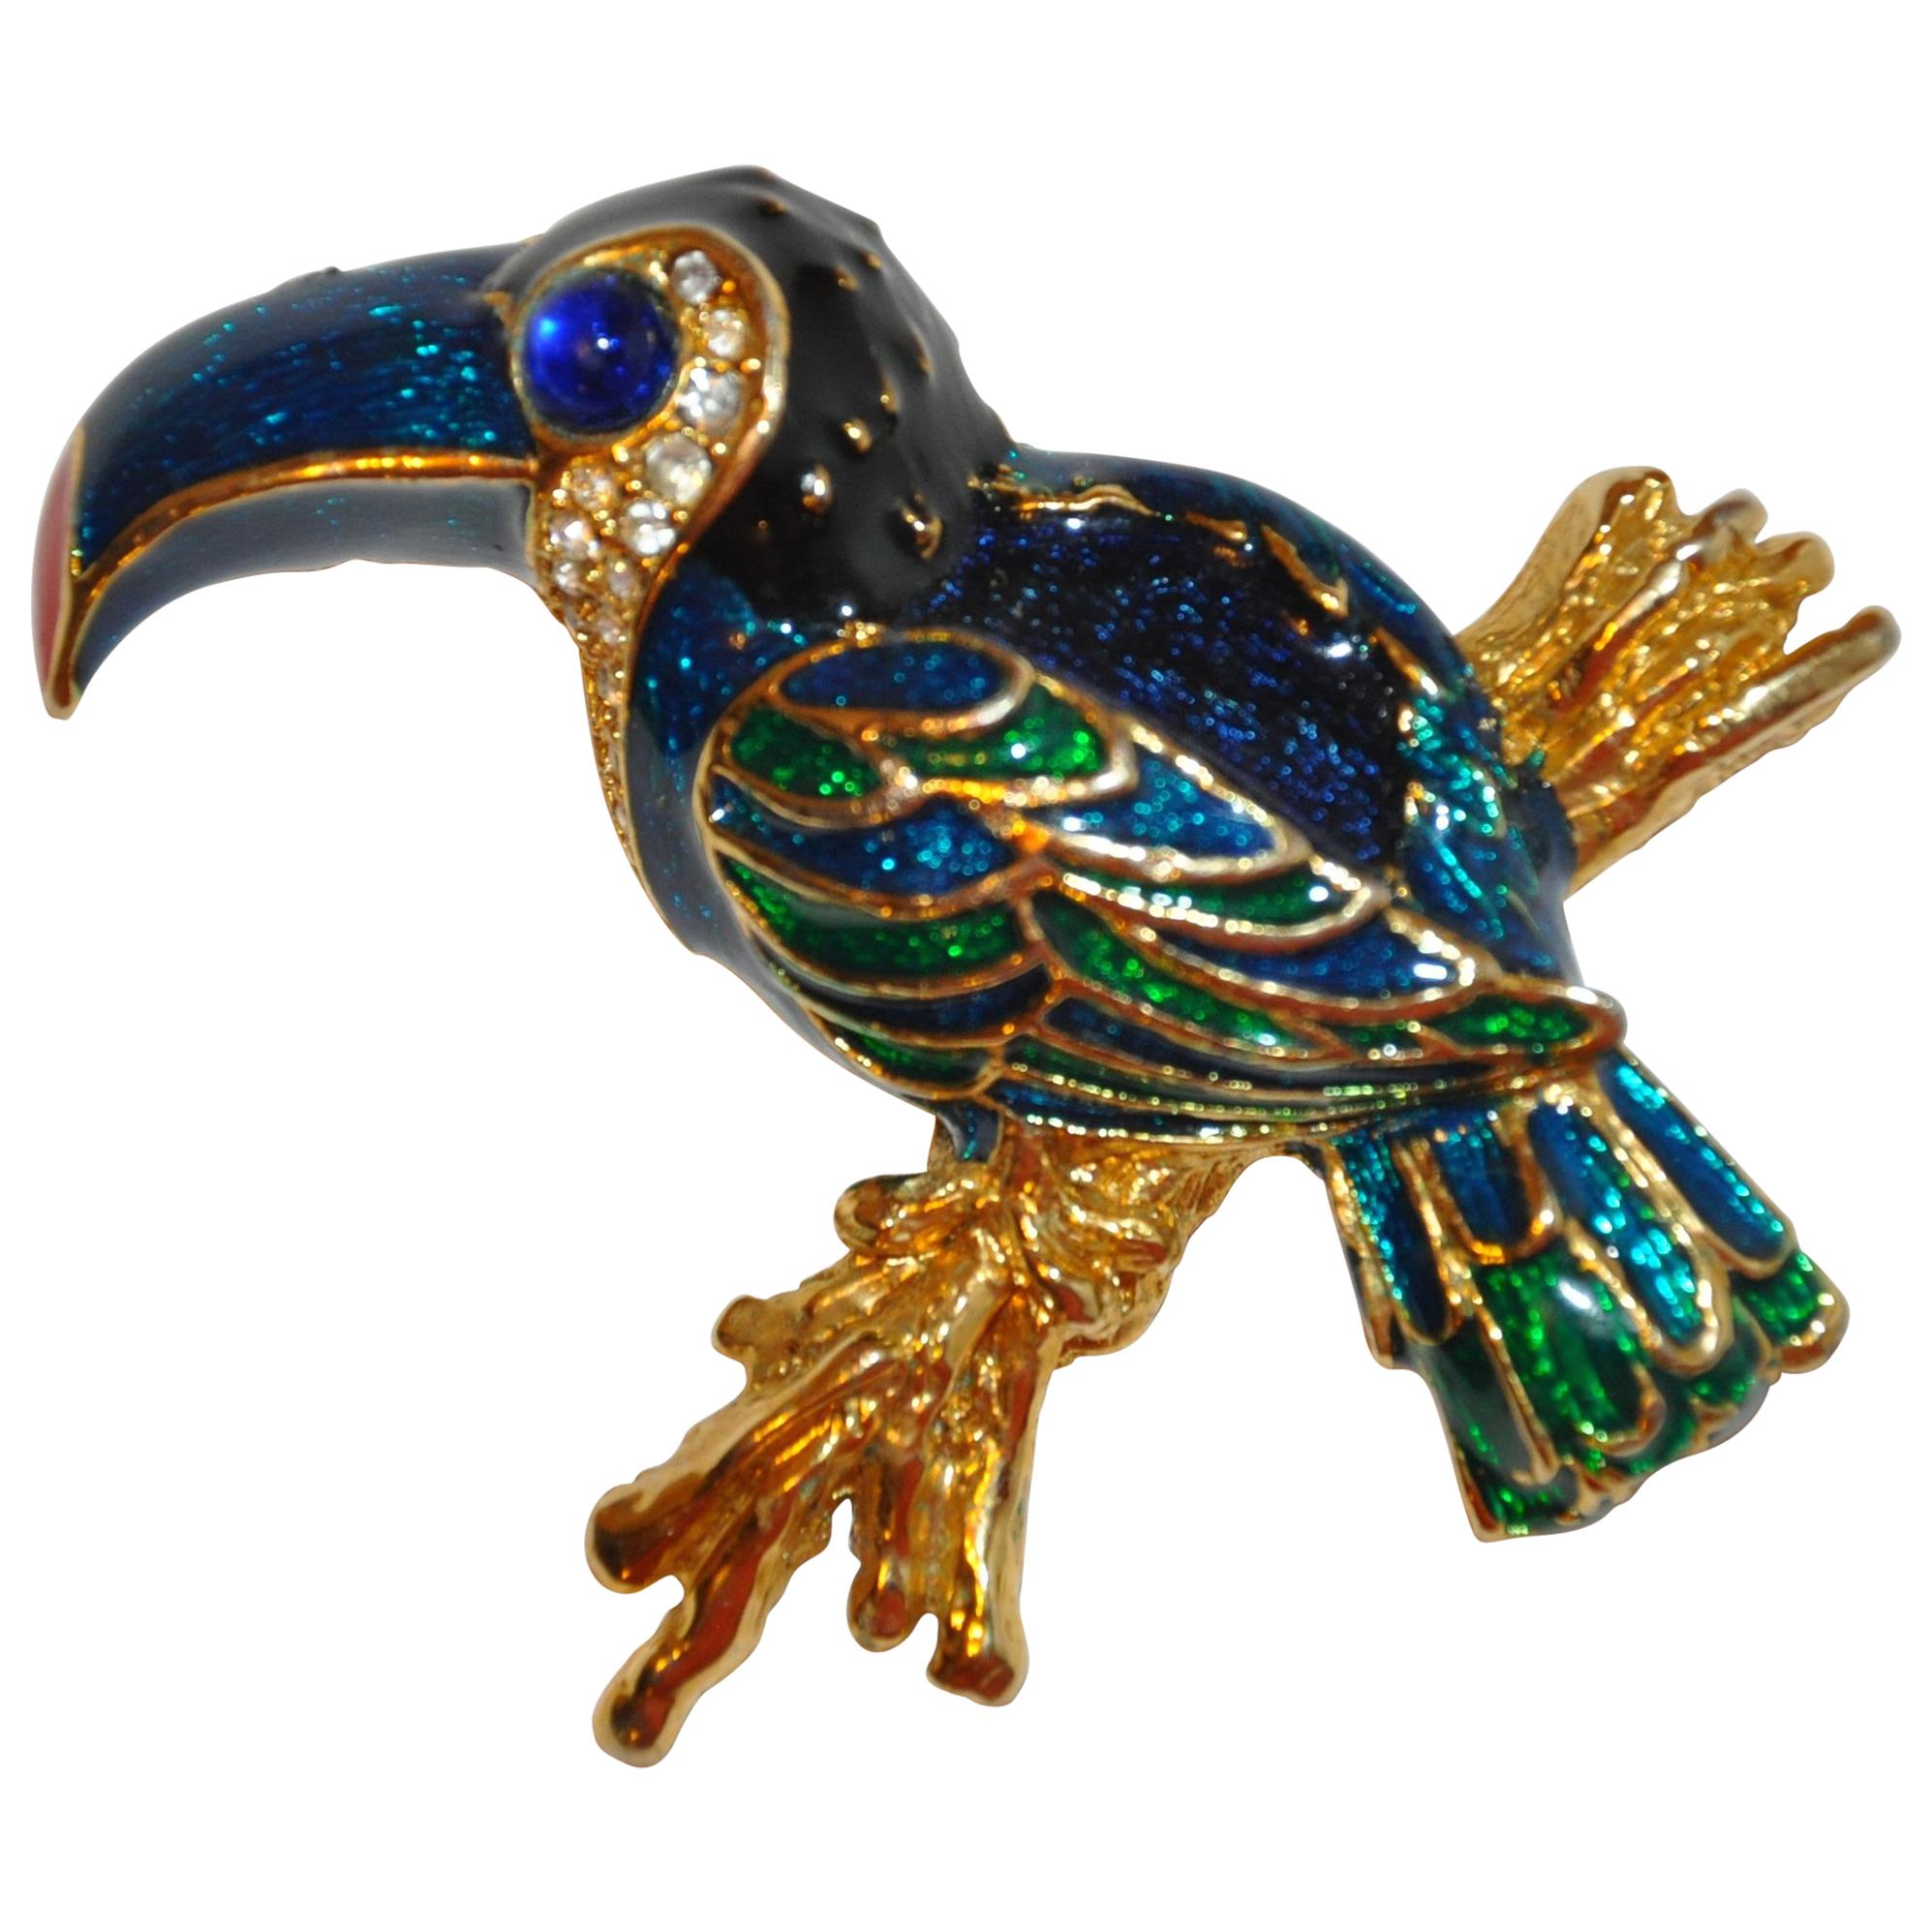 Whimsical Multi-Shade Enamel Inlay over Gilded Gold Hardware "Bird" Brooch For Sale